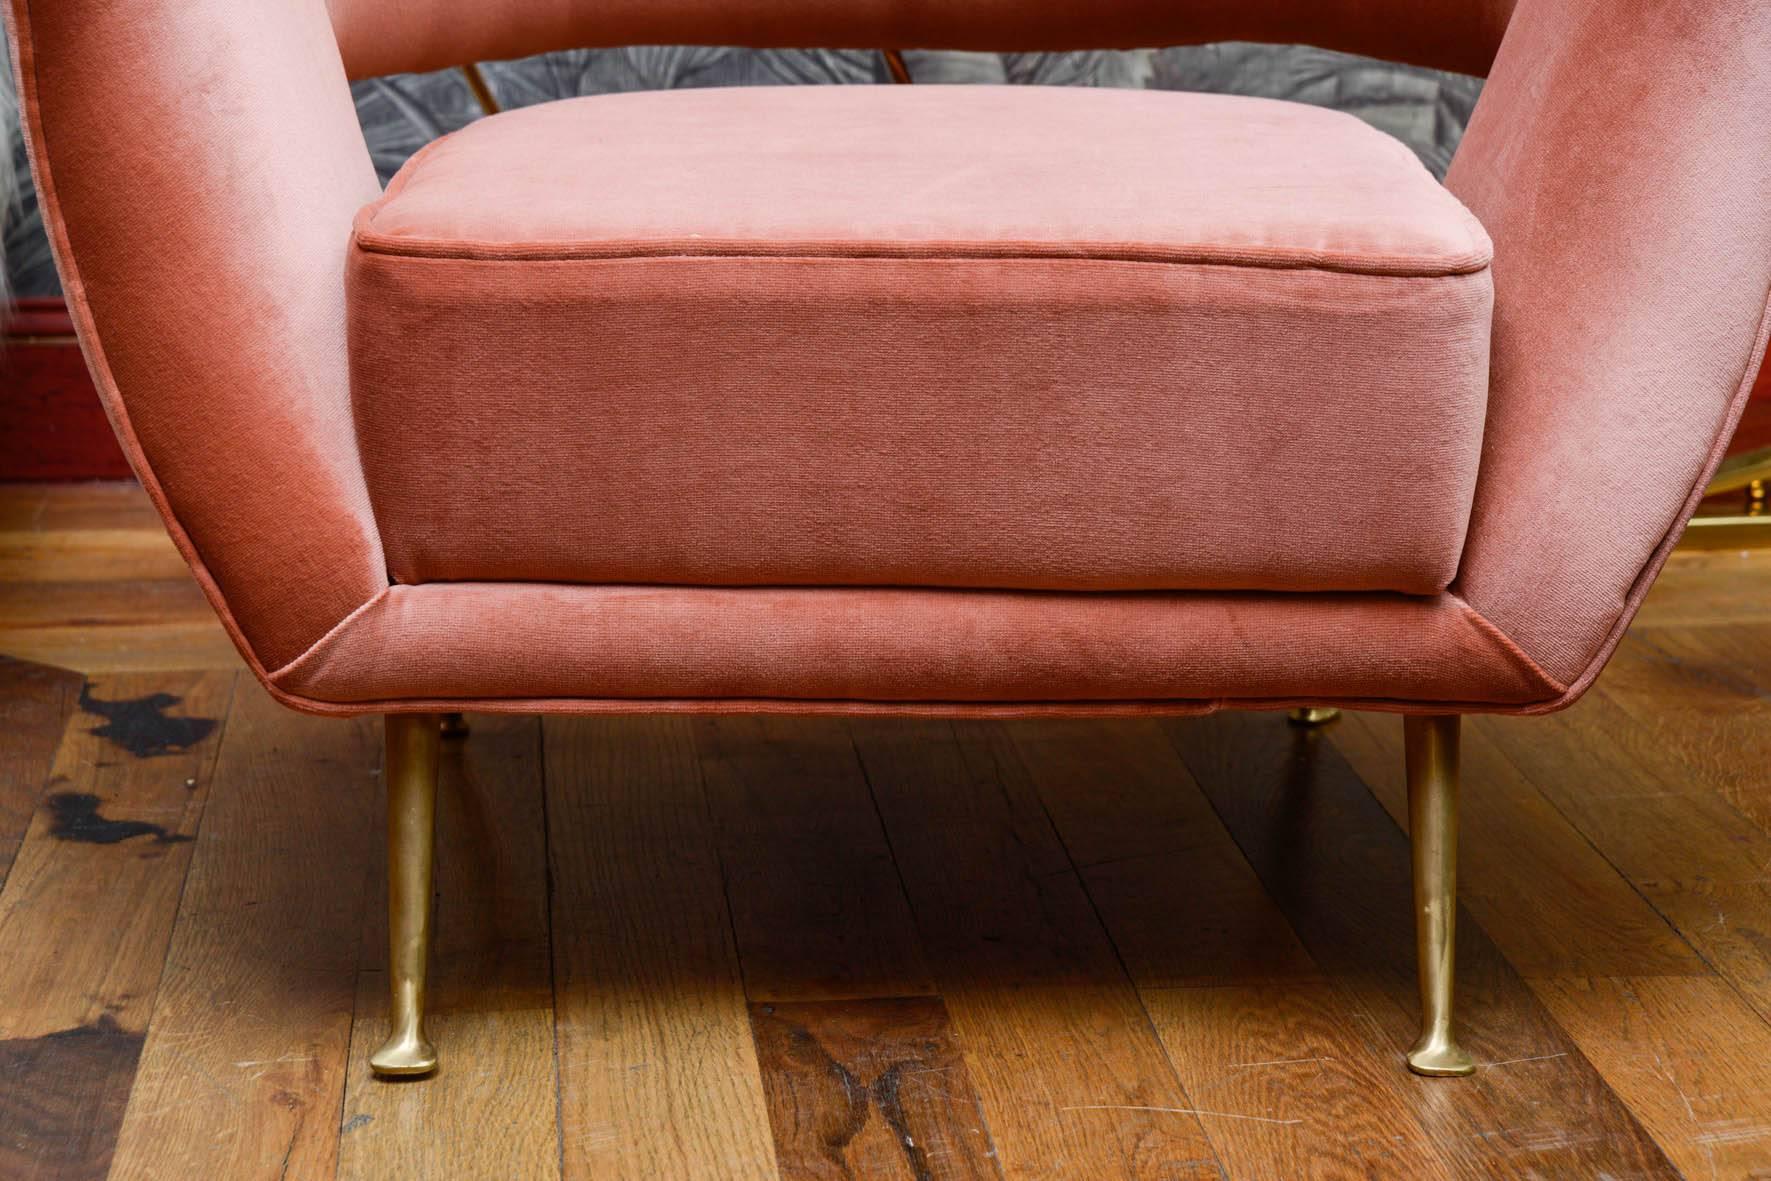 Pair of vintage armchairs with brass legs, upholstered with salmon pink velvet.